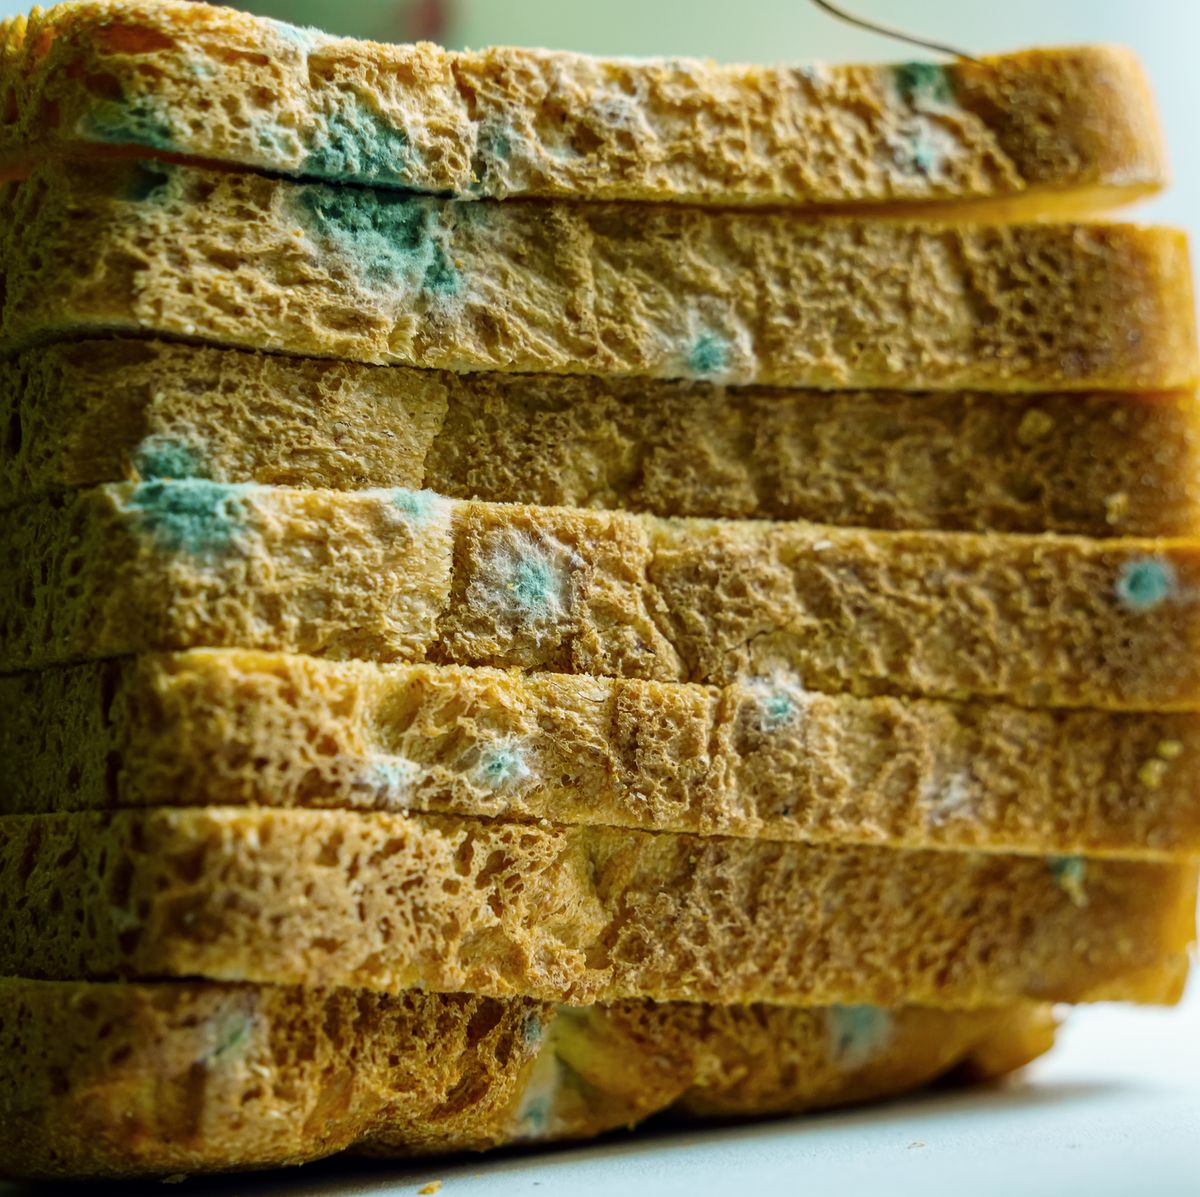 What Happens If You Eat Moldy Bread? - HICAPS Mktg. Corp.